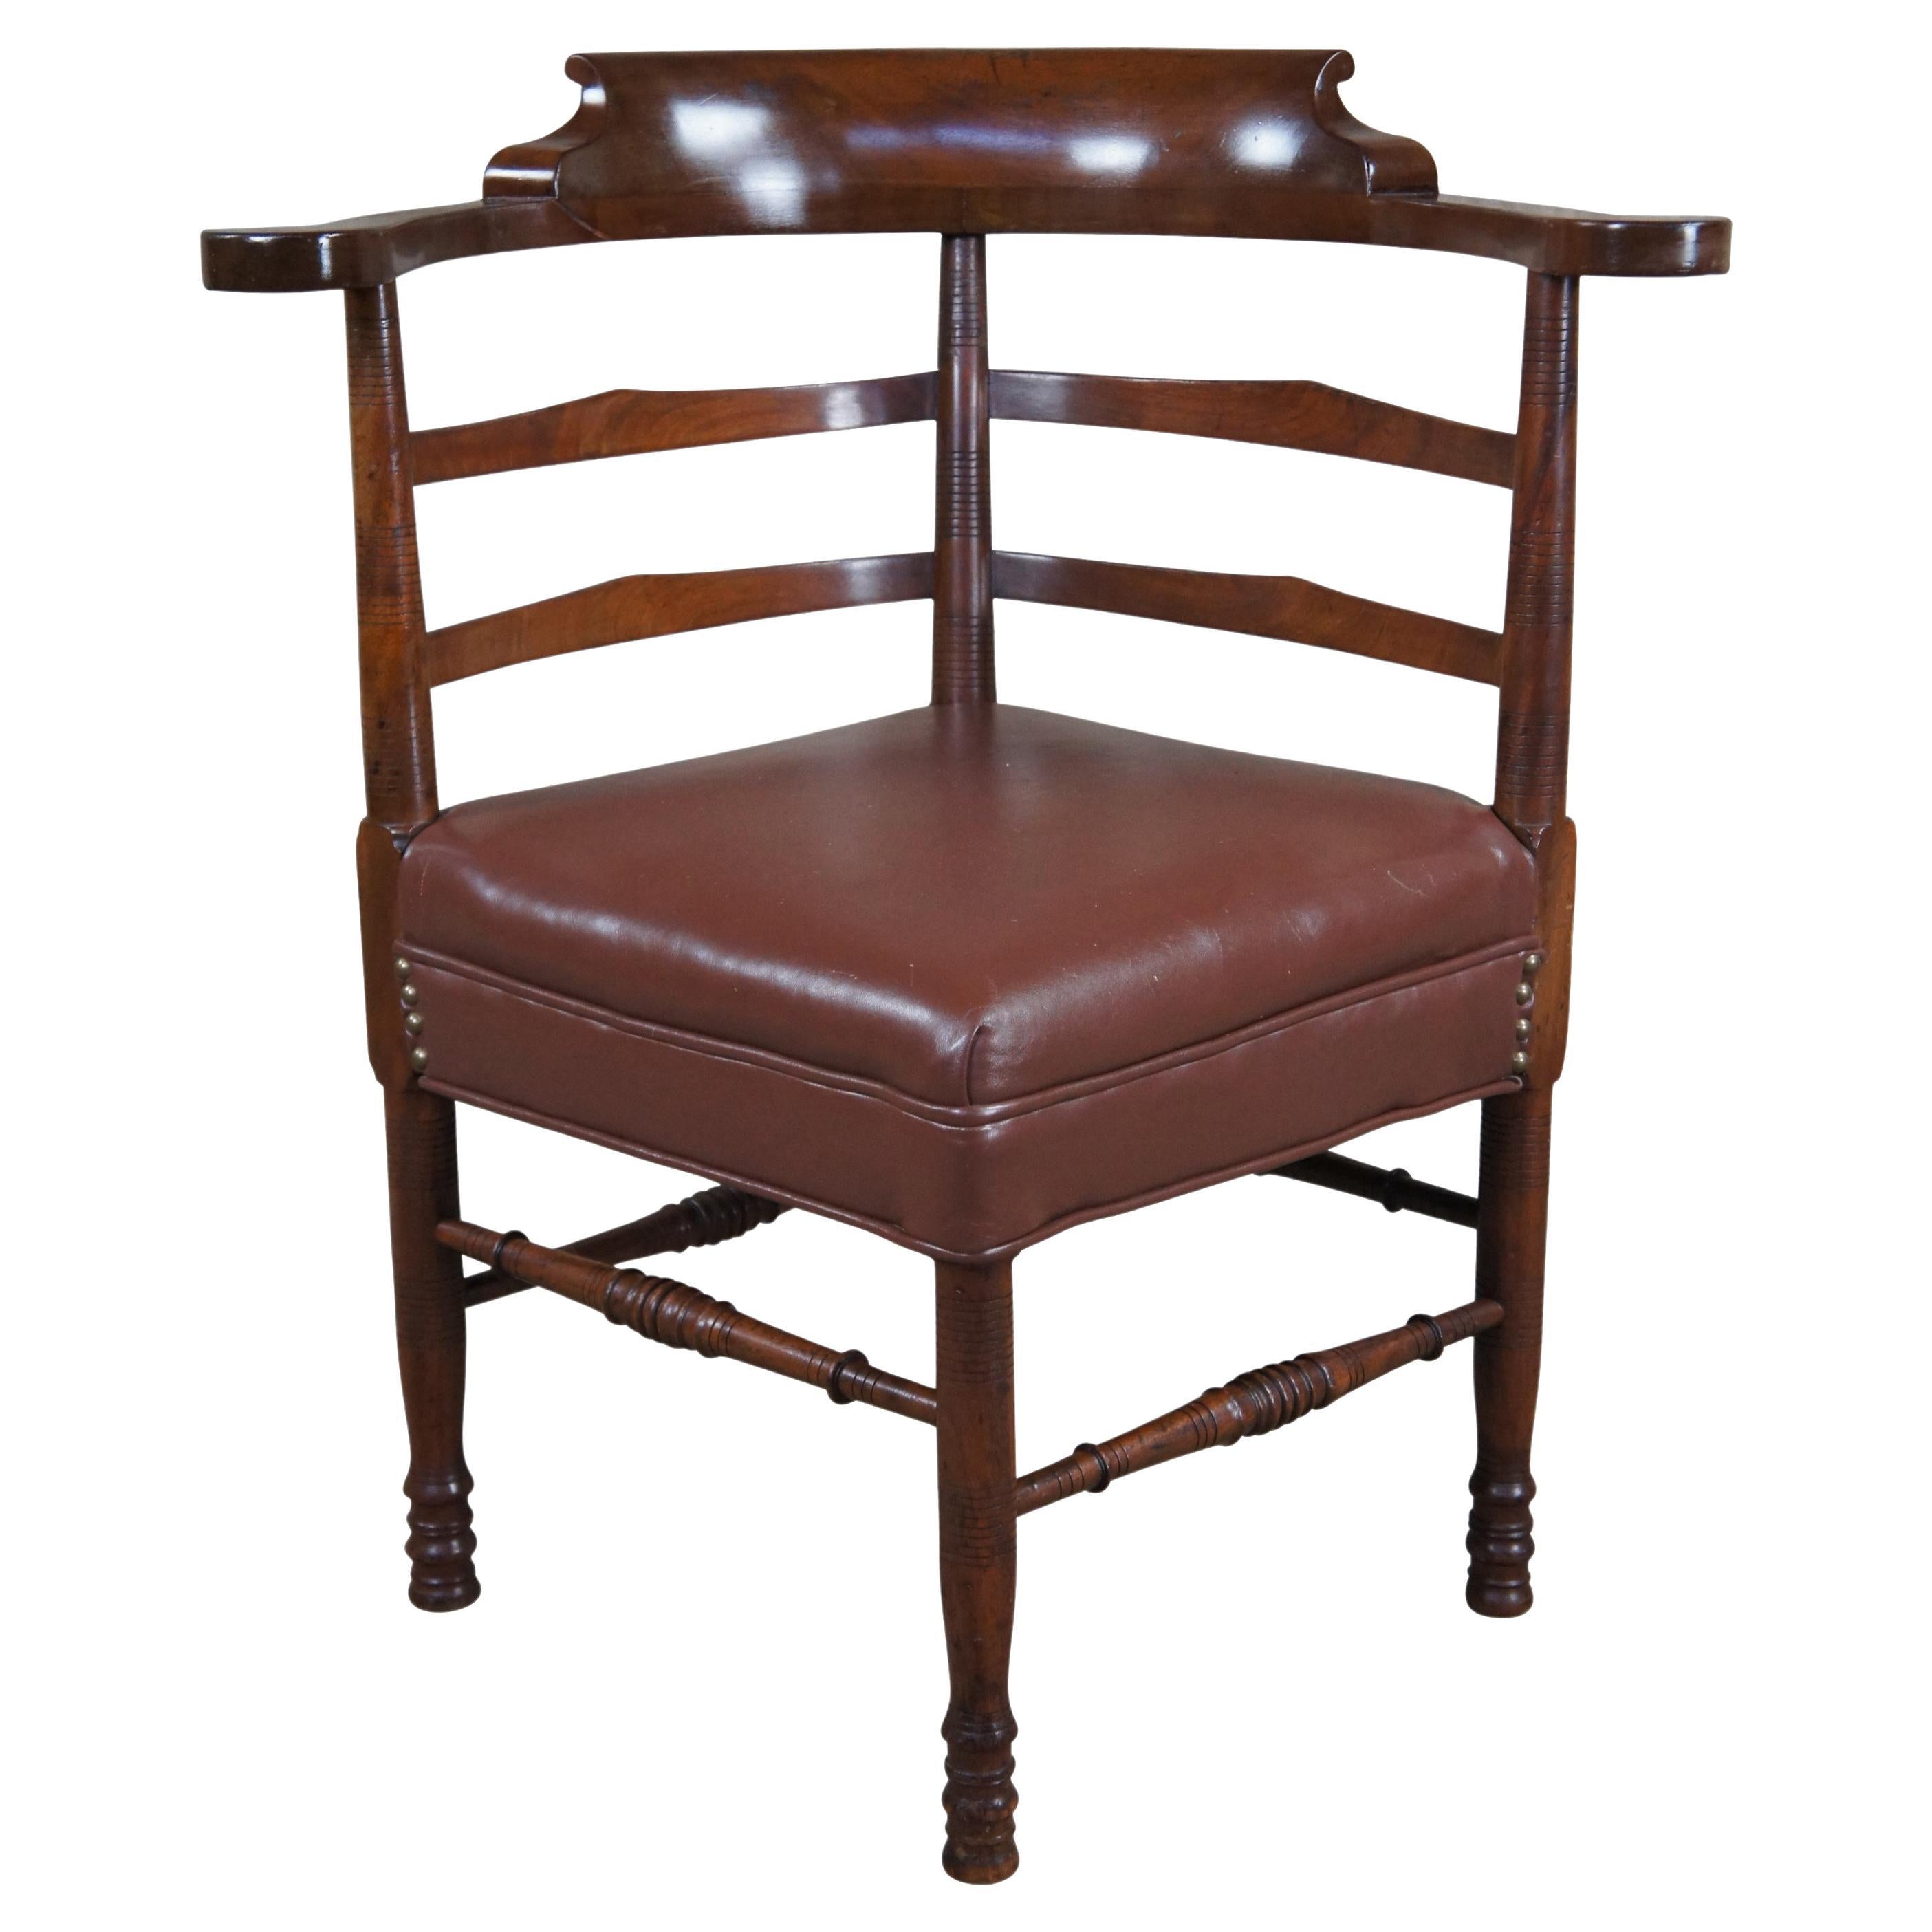 Antique English Country Mahogany Ladderback Roundabout Corner Arm Chair Seat